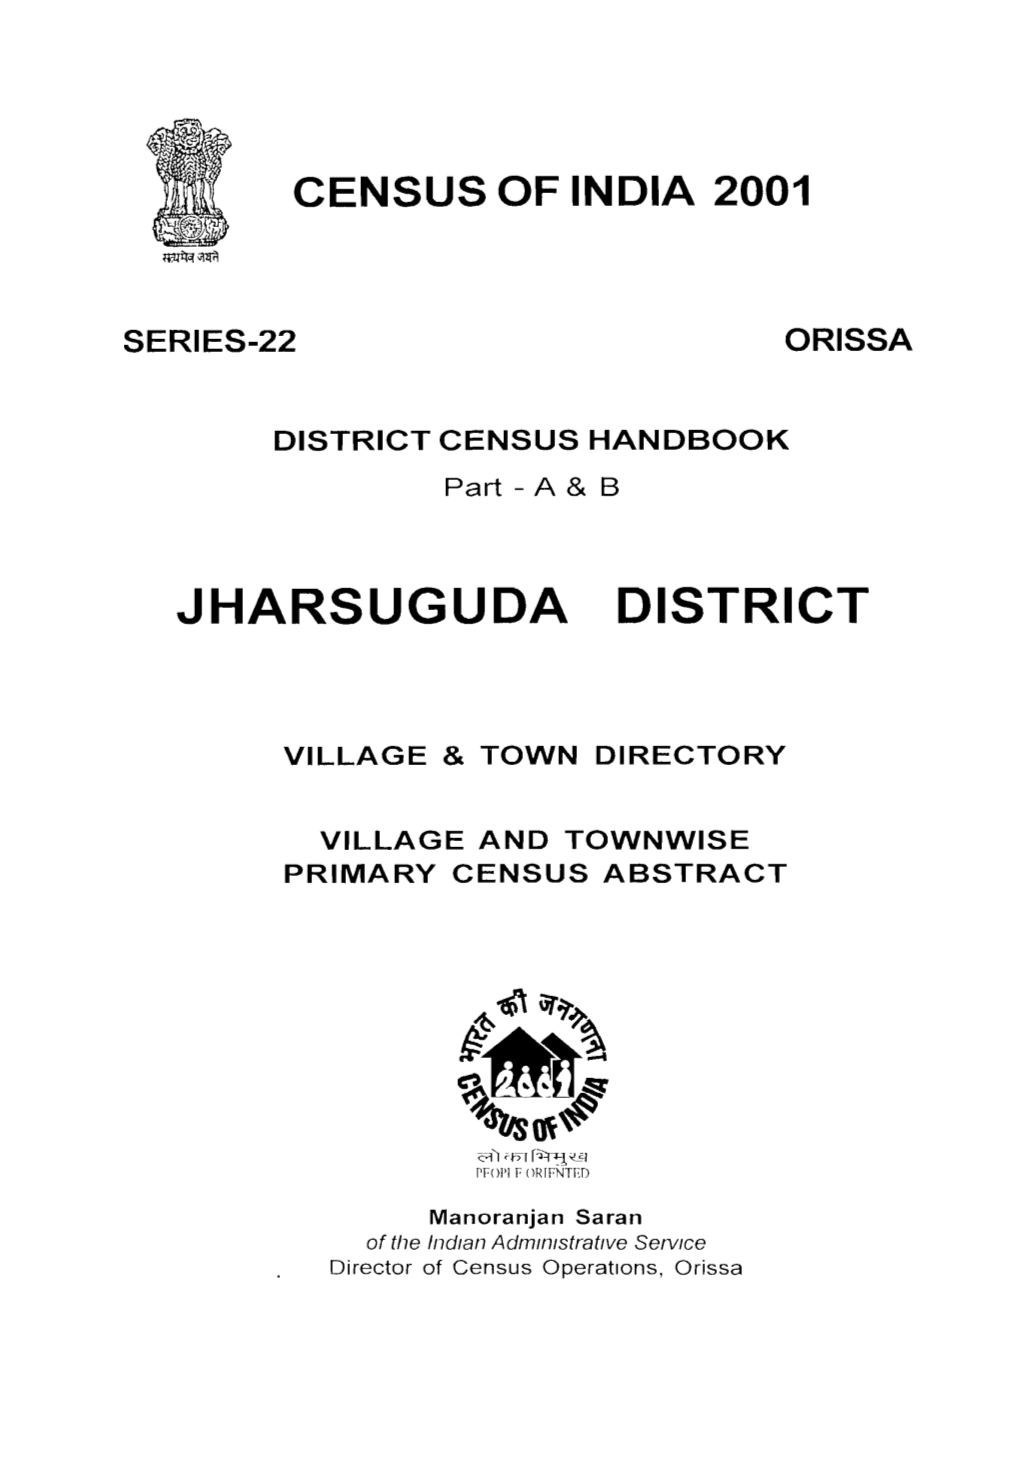 Village and Townwise Primary Census Abstract, Jharsuguda, Part